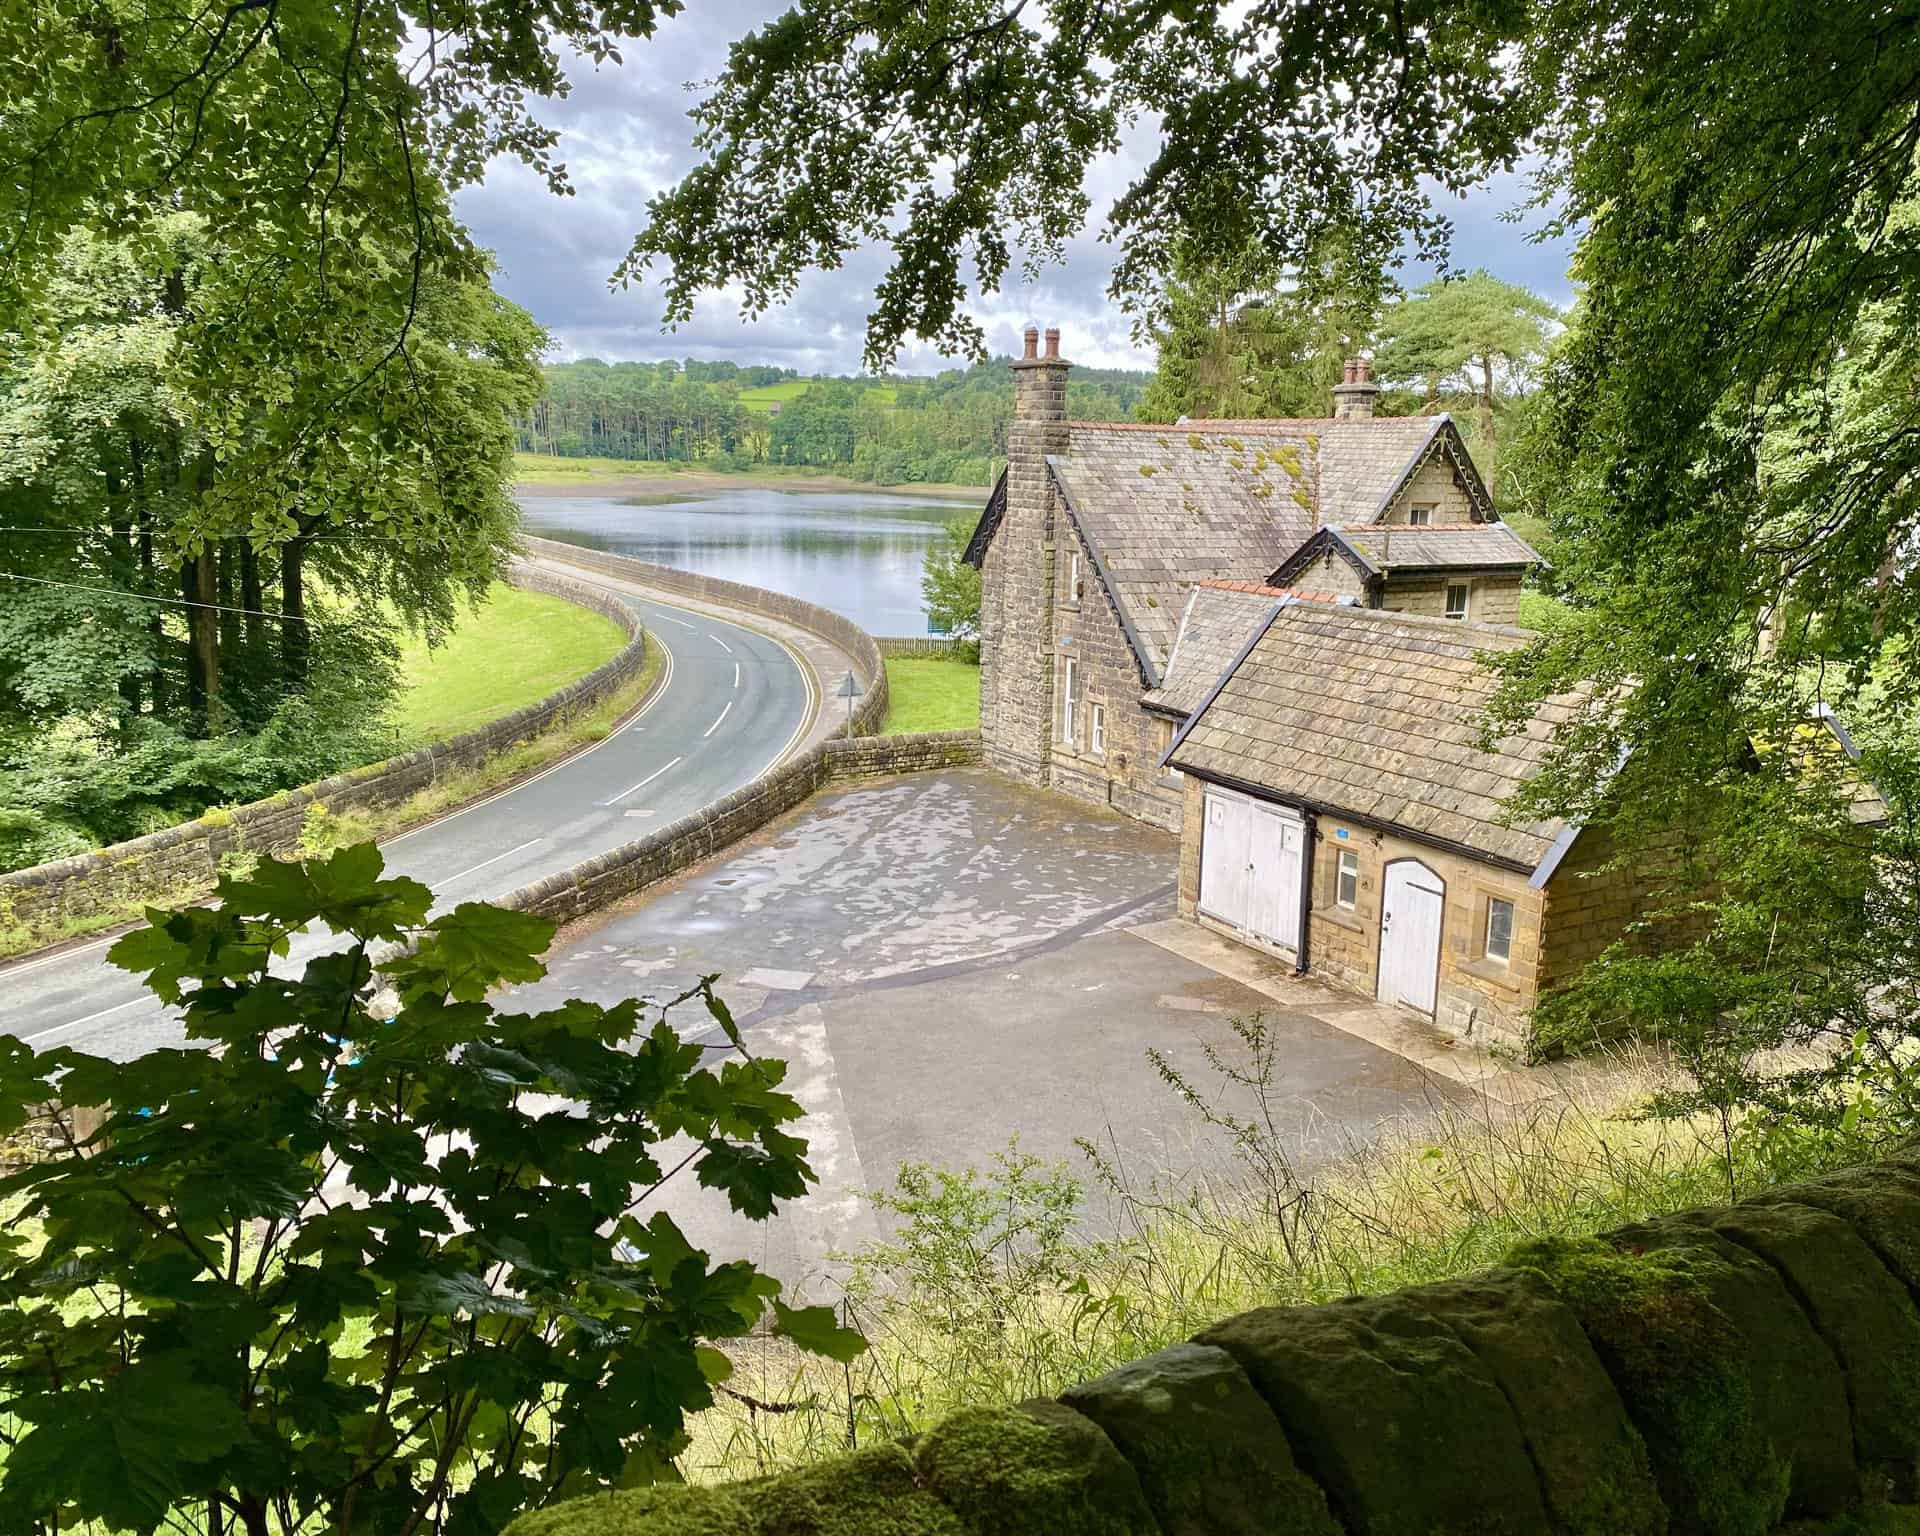 A downward view of Reservoir House at the northern extremity of Fewston Embankment.